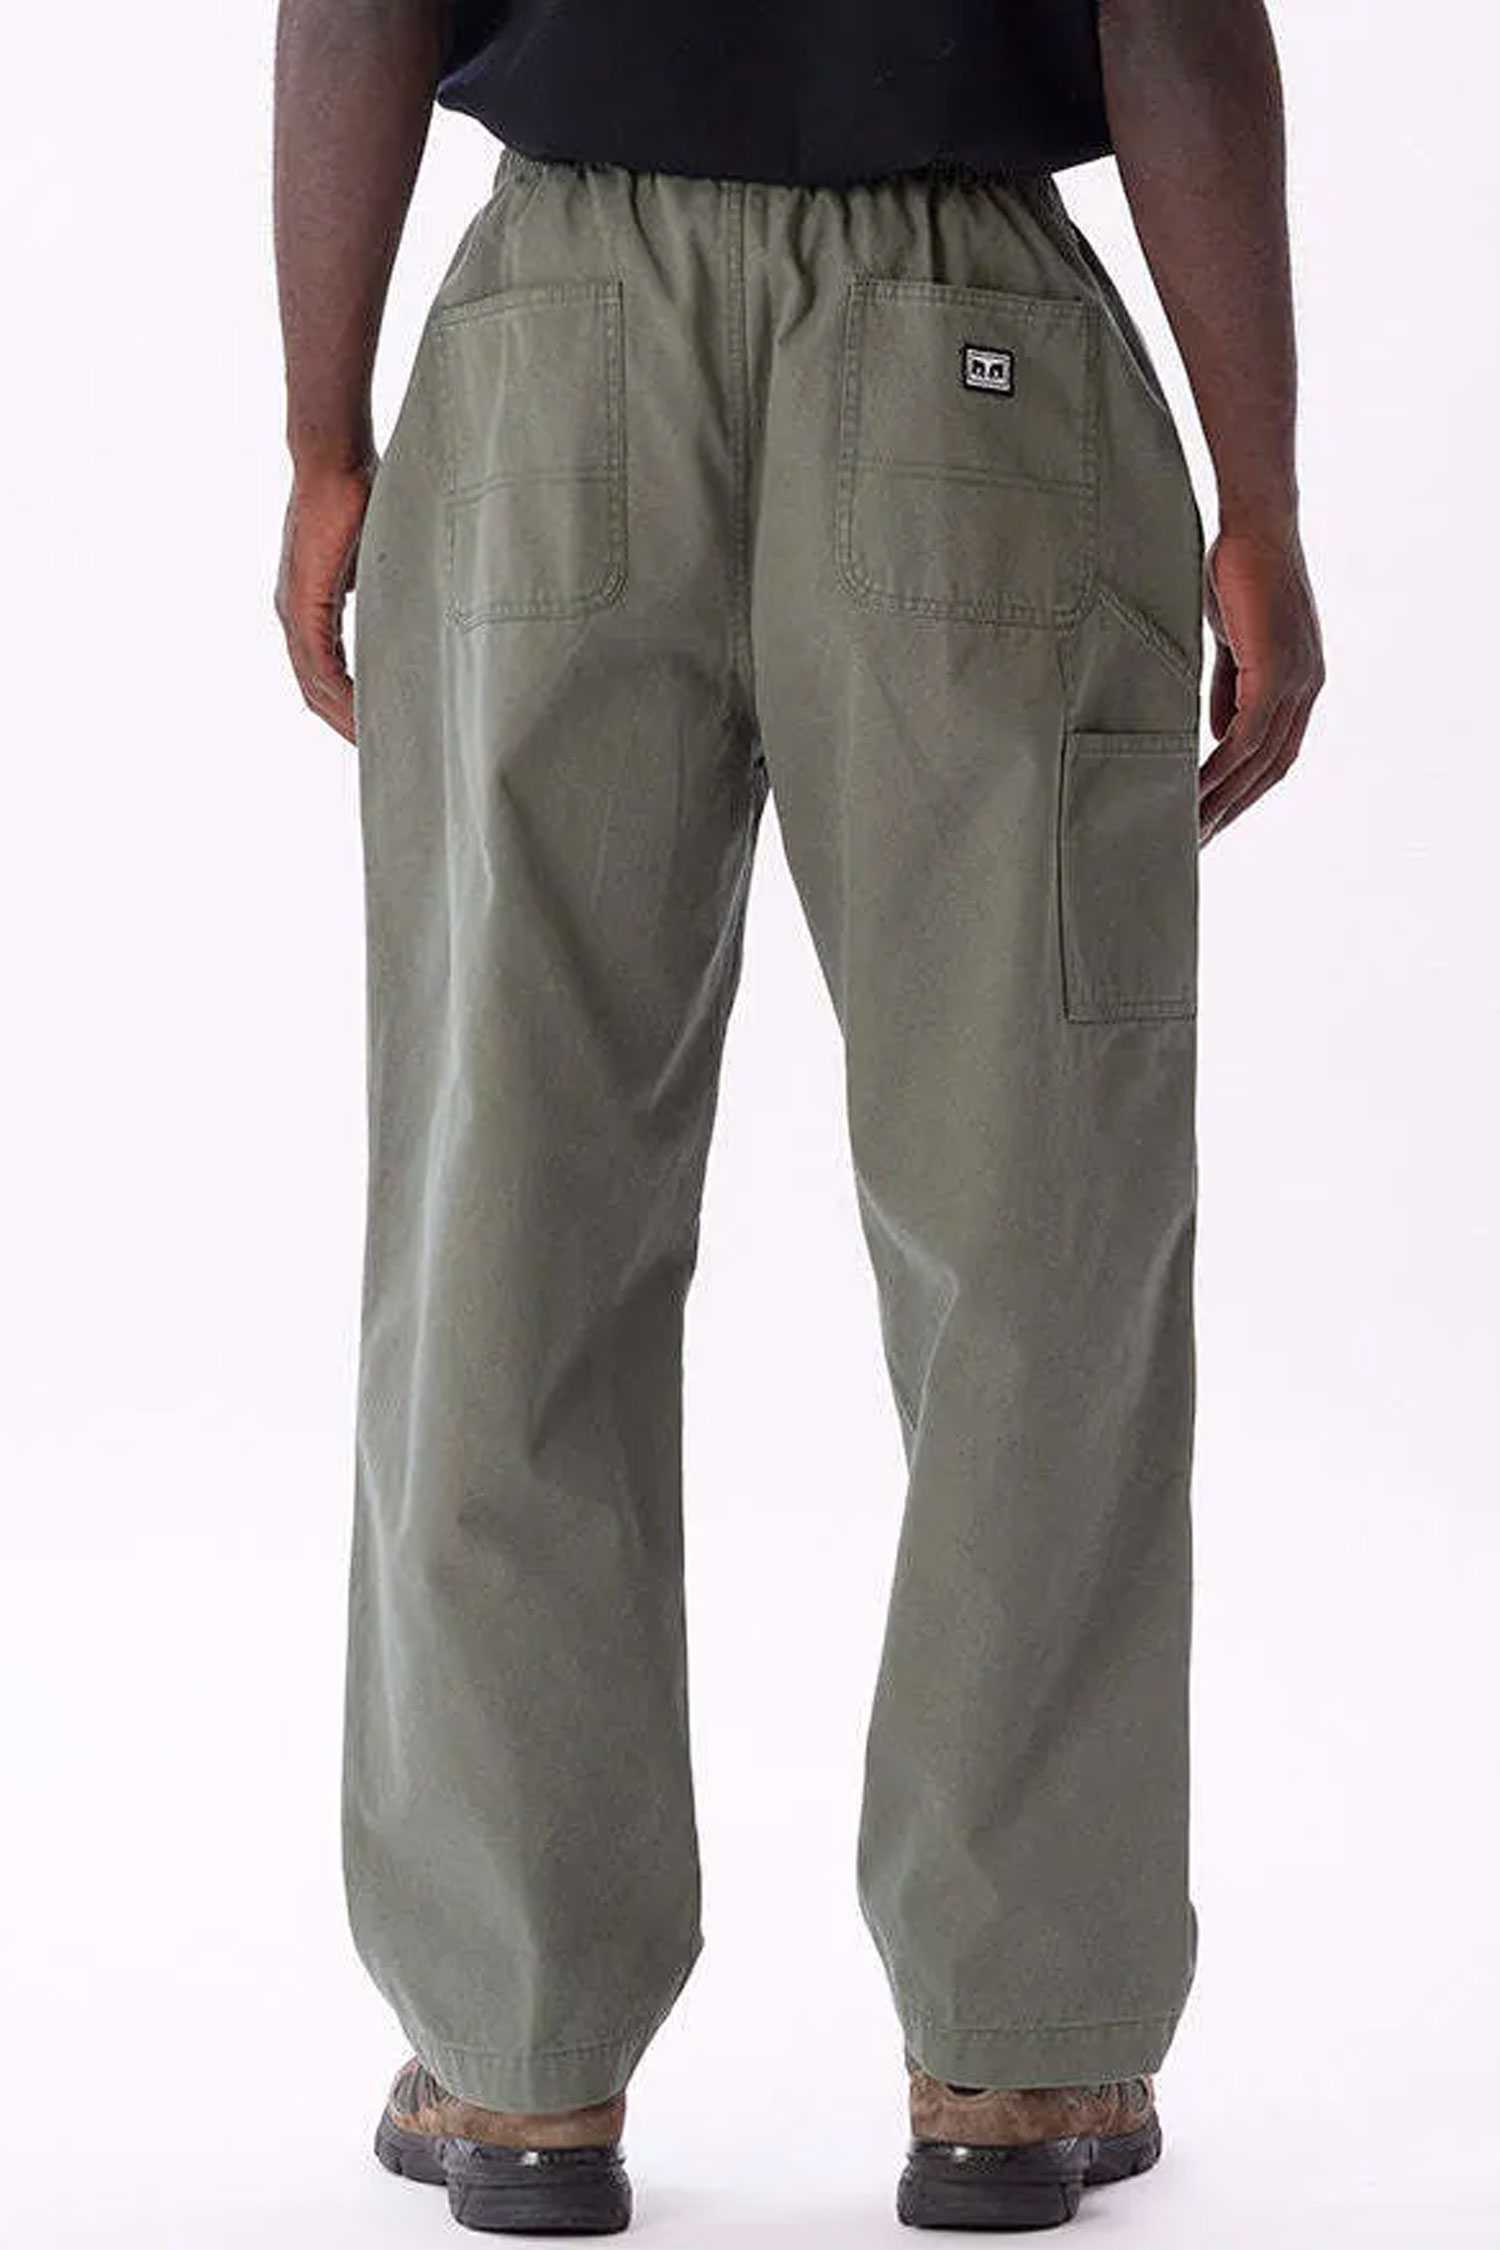 OBEY] BIG EASY CANVAS PANT - SMOKEY OLIVE_OBEY